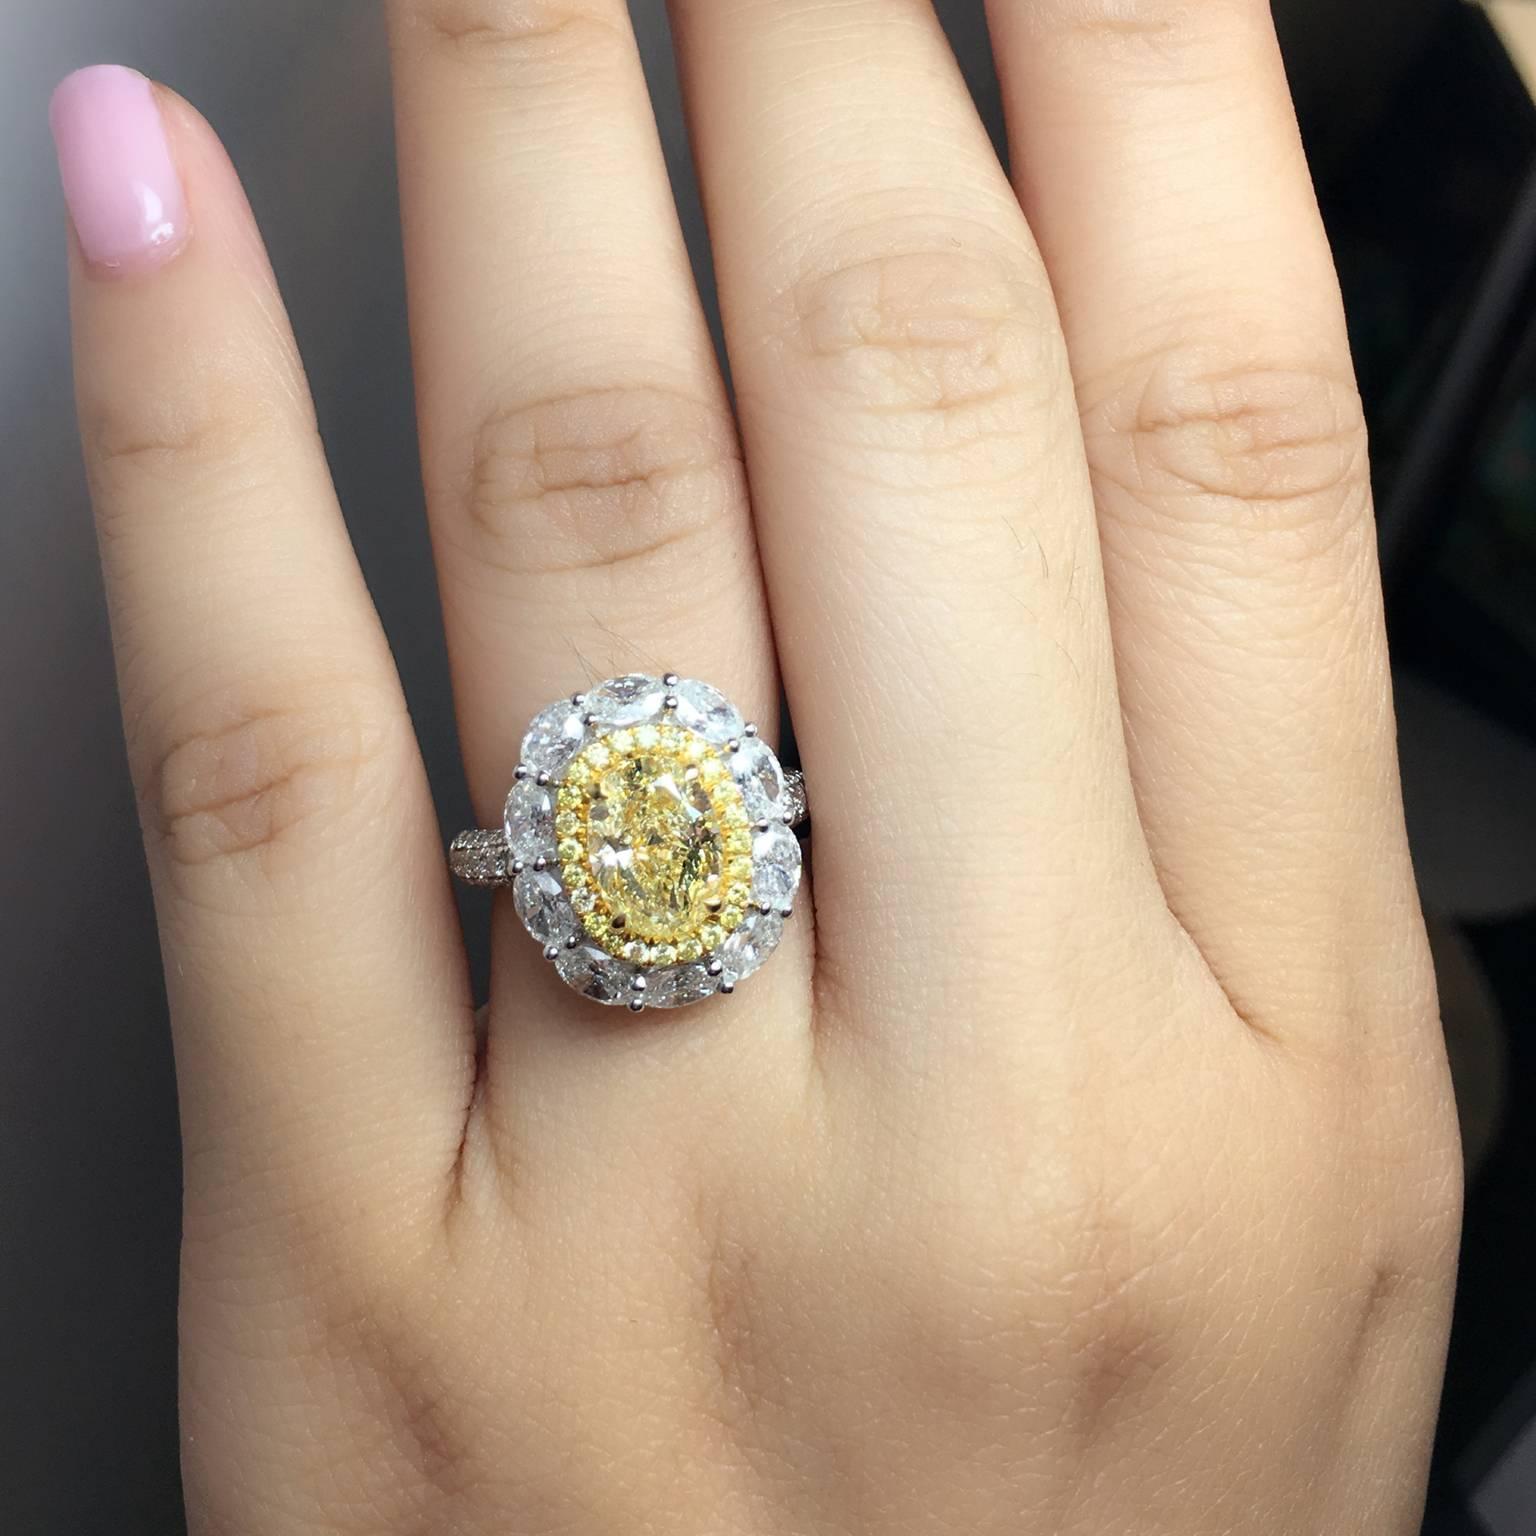 Fancy Yellow 2.11 Carat Oval cut diamond and VS2 clarity center stone. Surrounded by a row of 0.20 carat of yellow diamonds and 10 oval diamonds around the row. Small round brilliant diamonds on the band weighing 0.56 carat. Made in 18K gold. Ring